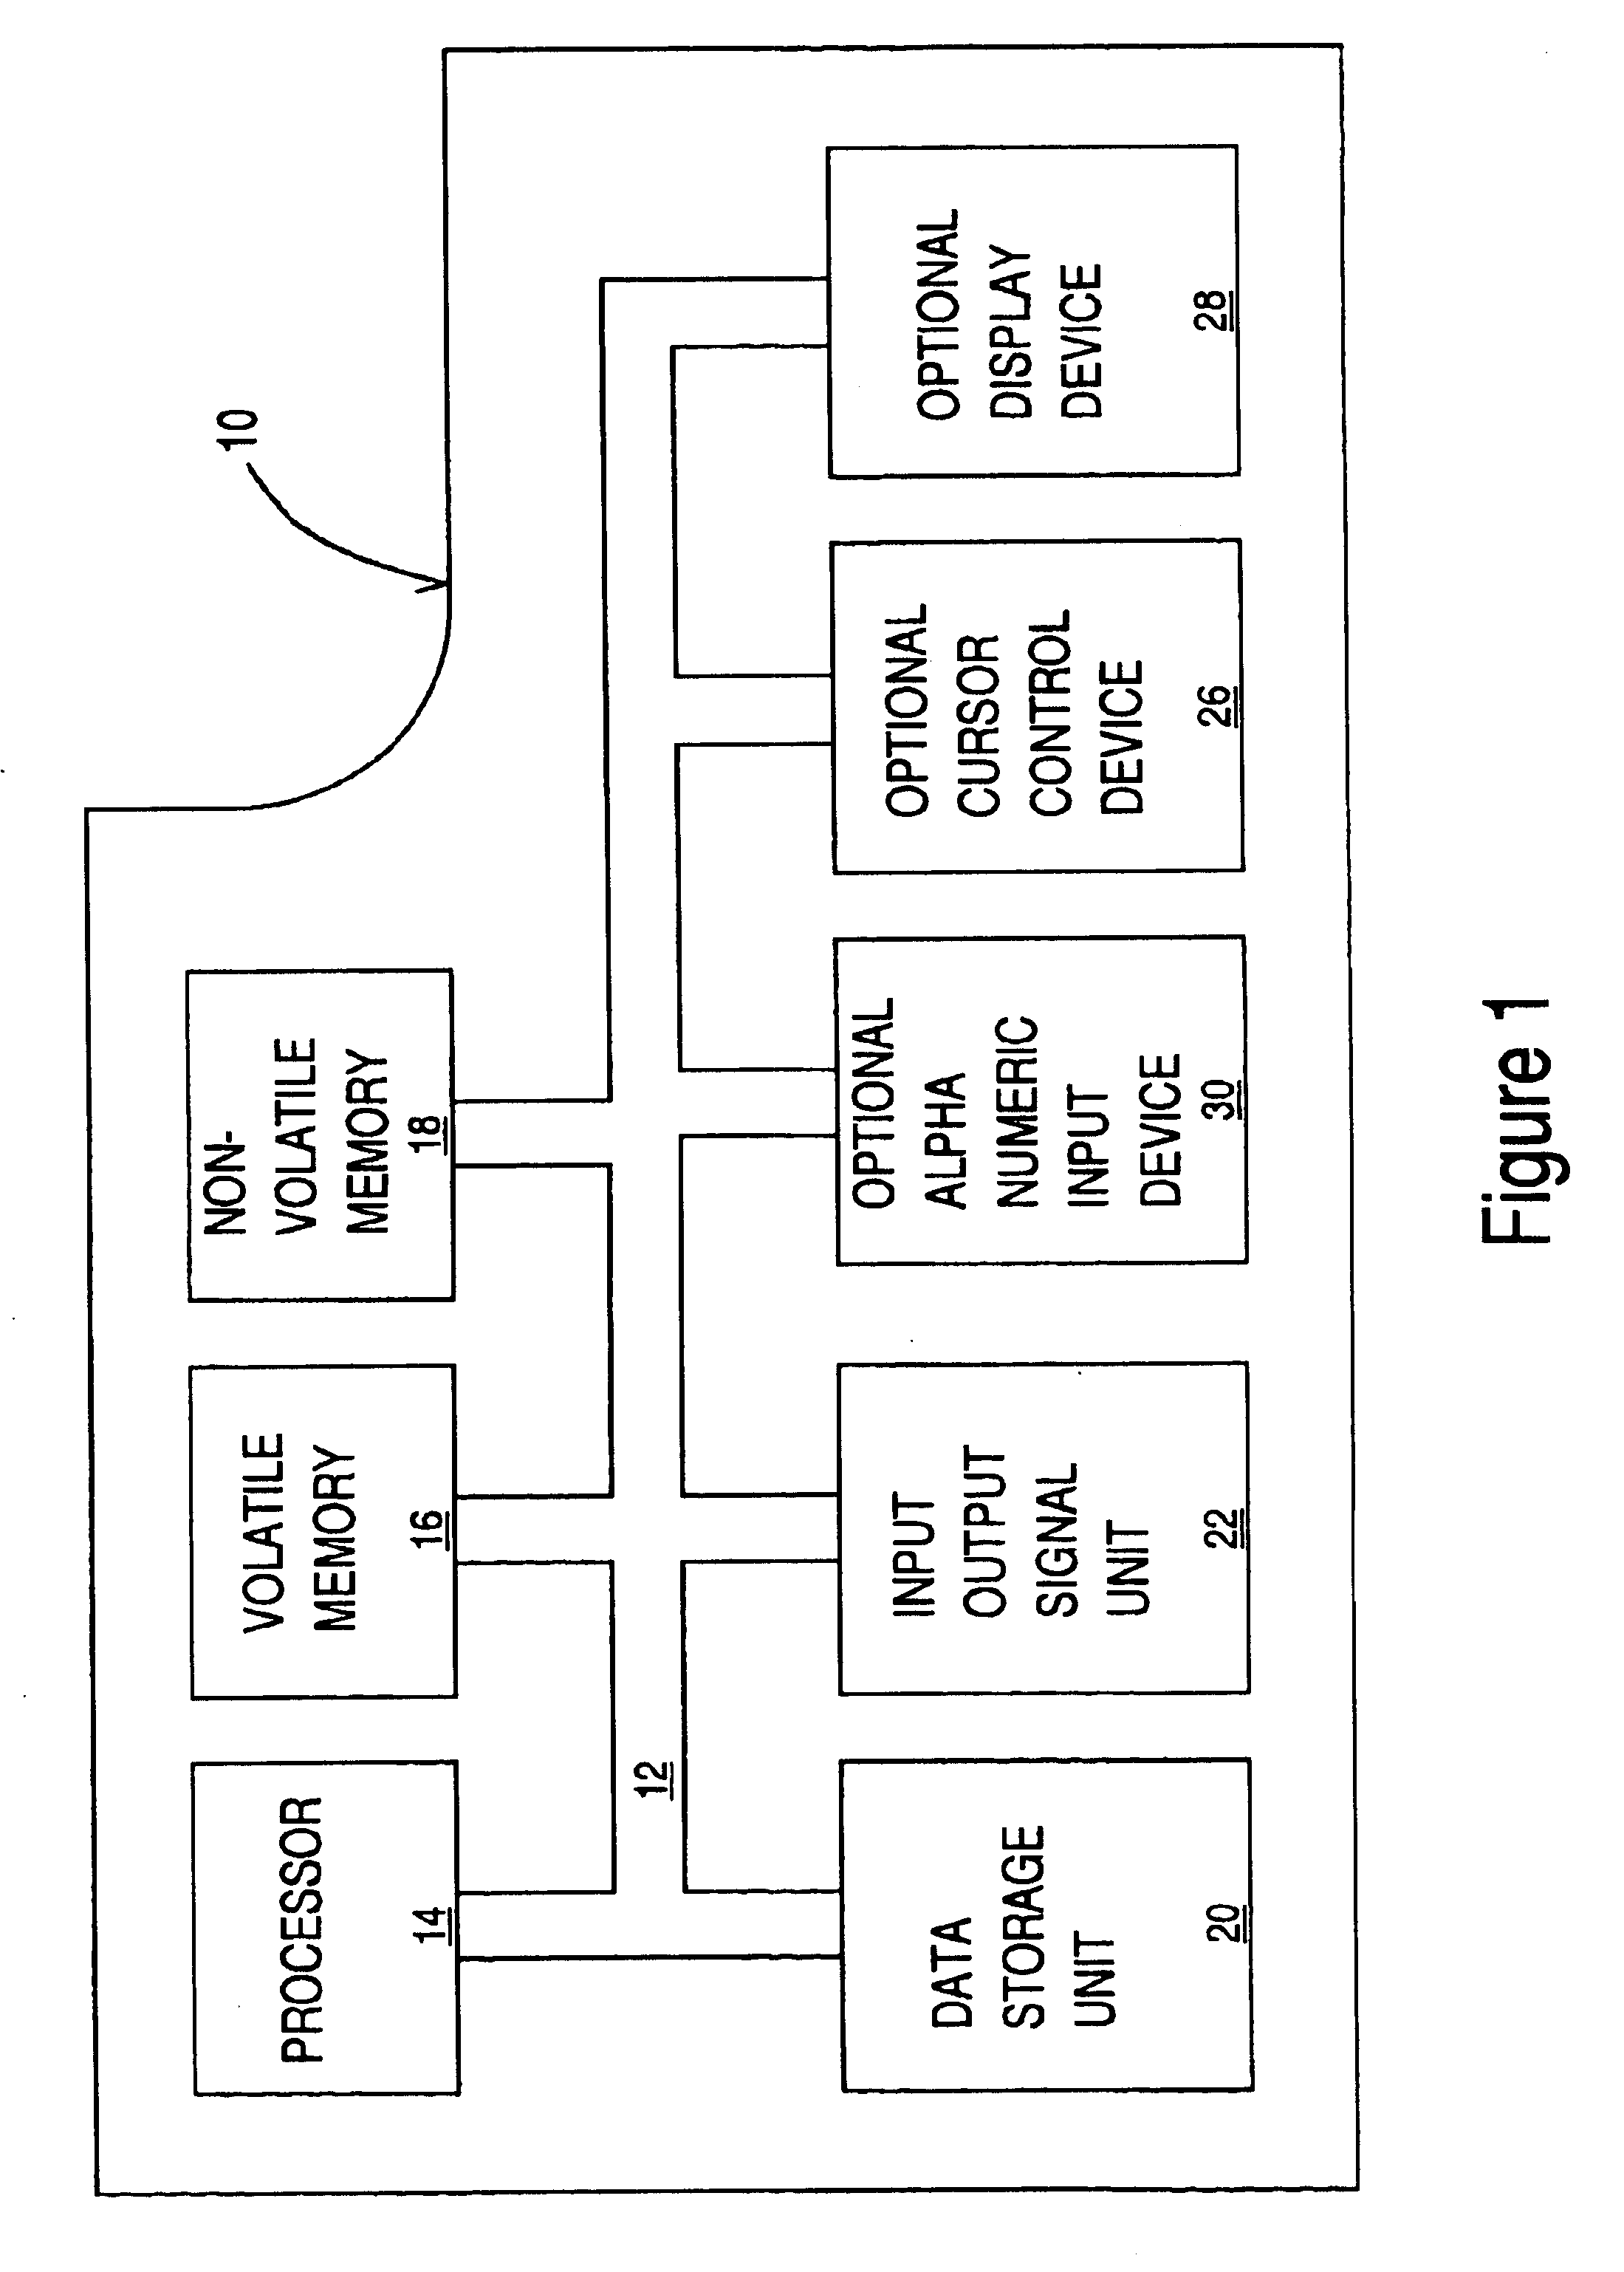 Method and apparatus with data partitioning and parallel processing for transporting data for data warehousing applications